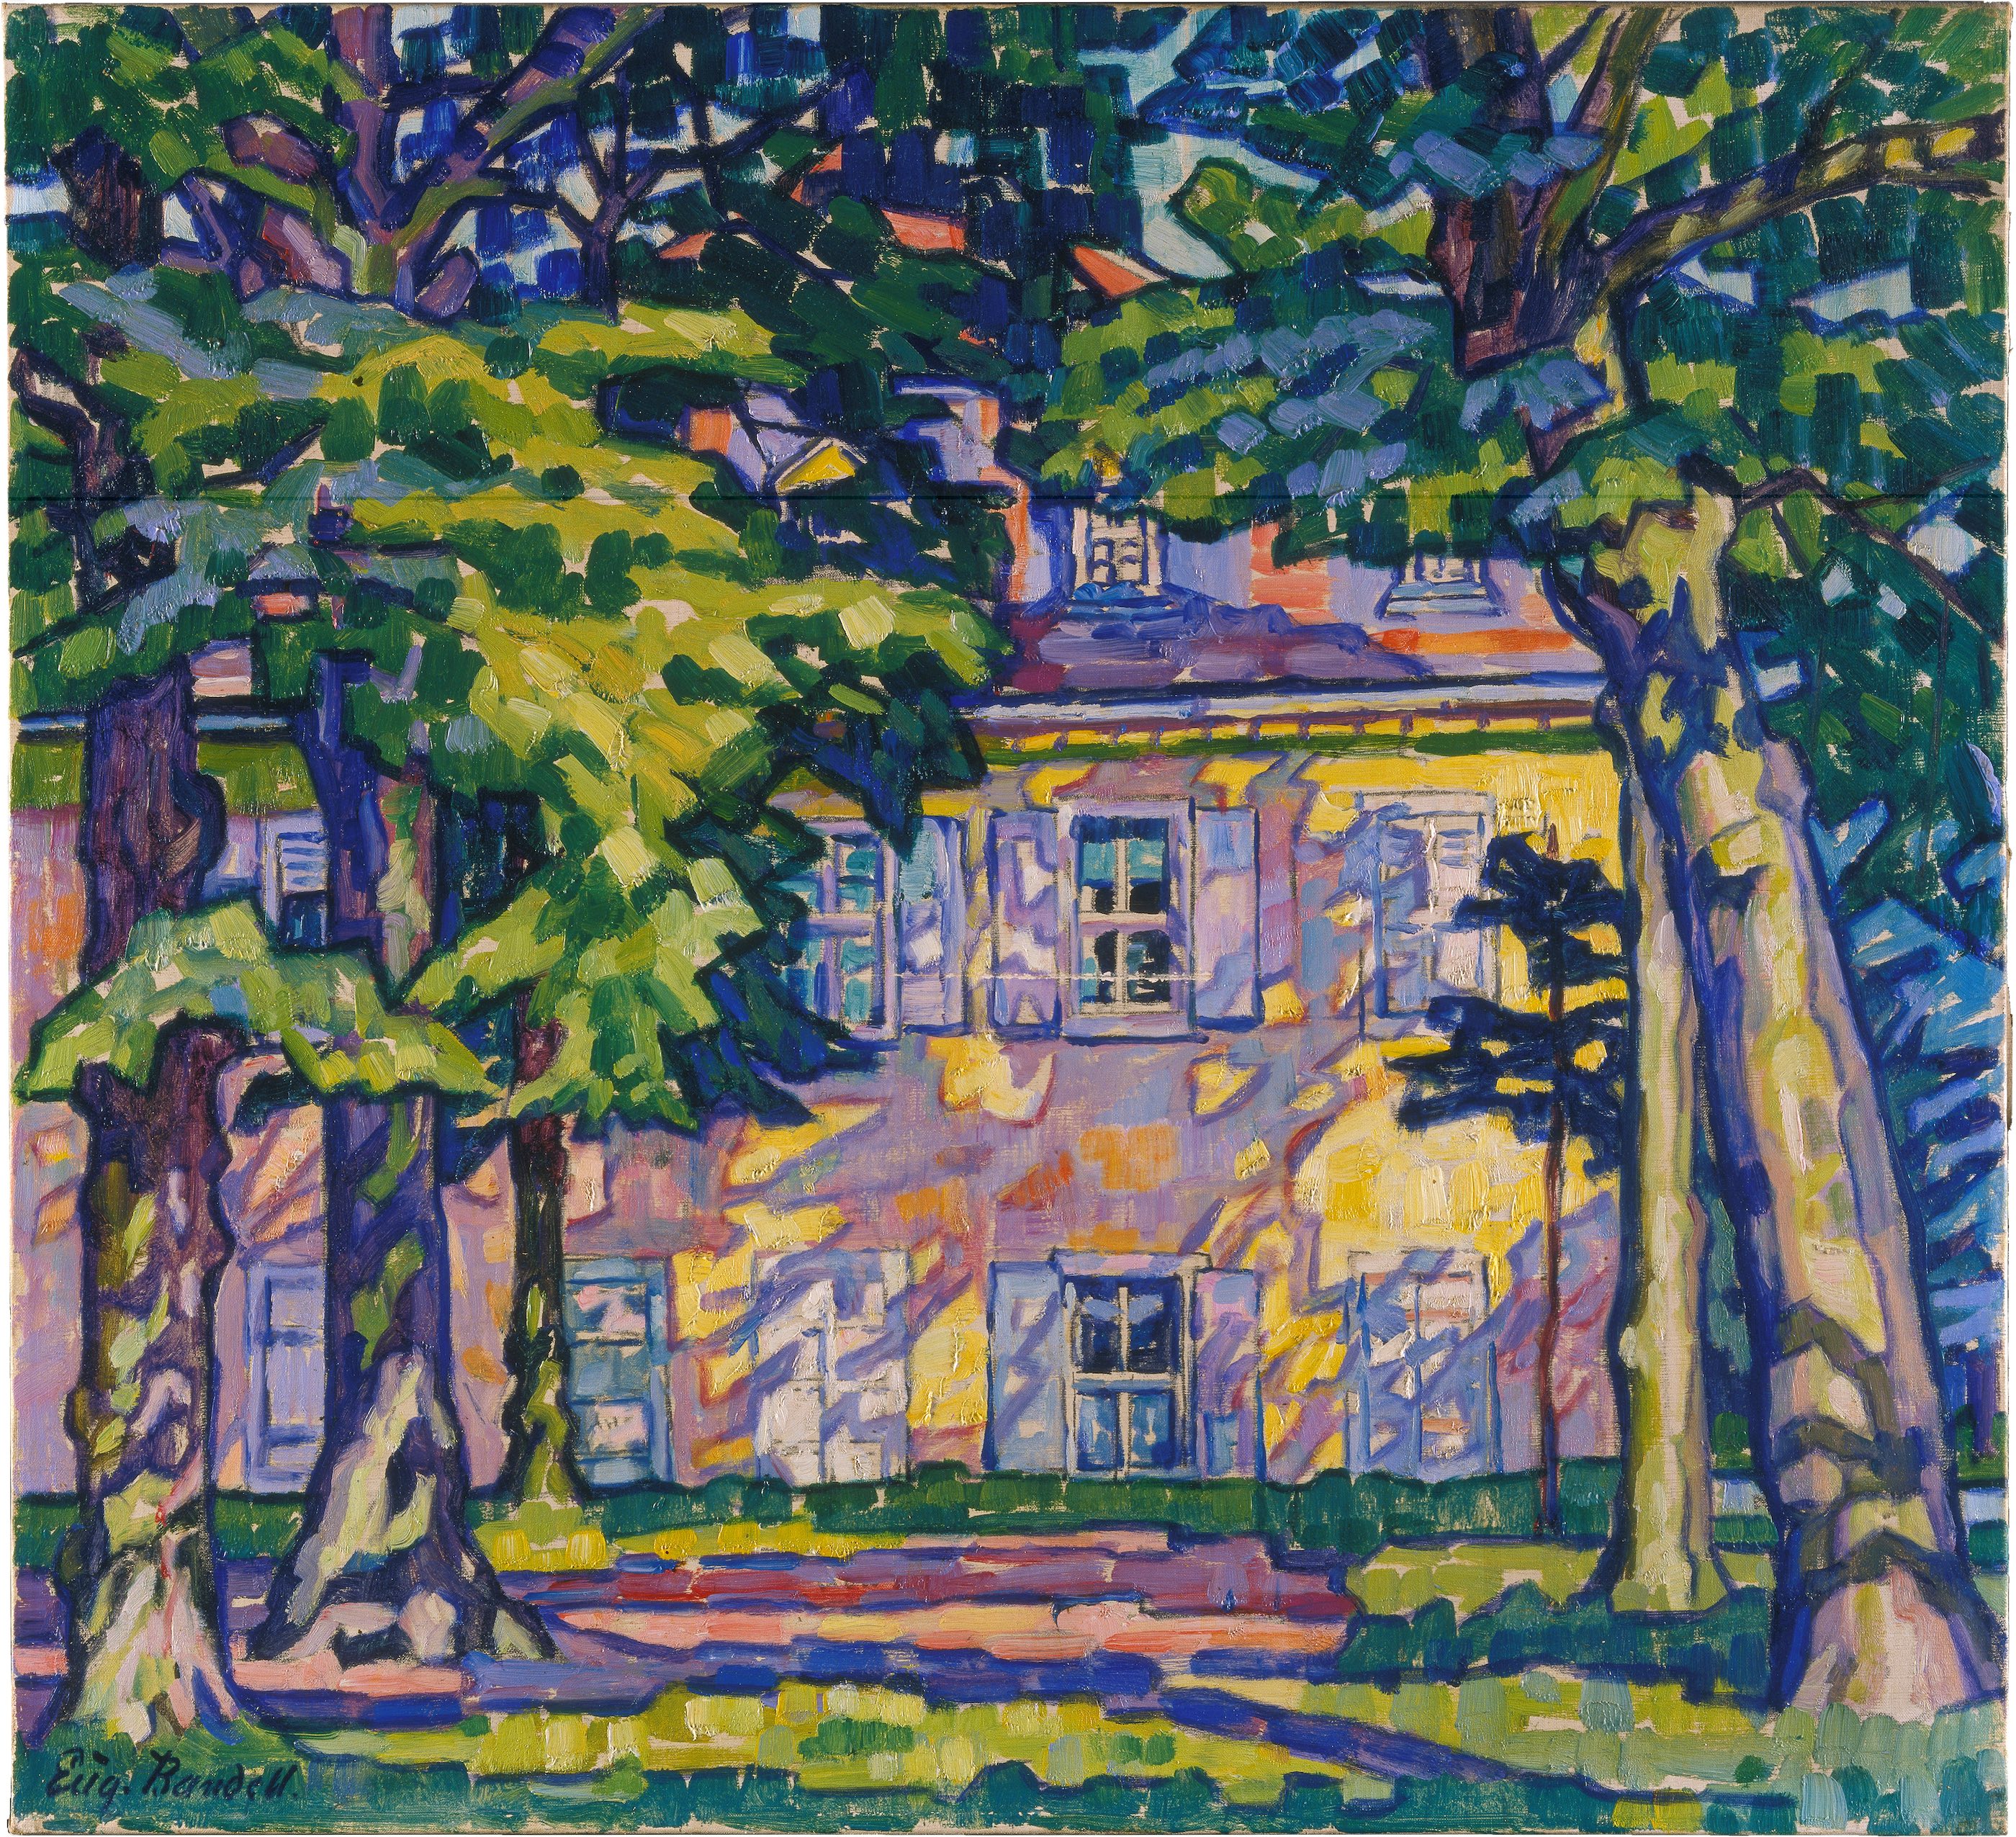 Sun in the Afternoon by Eugenie Bandell - 1913 - 64.5 x 70.5 cm Städel Museum